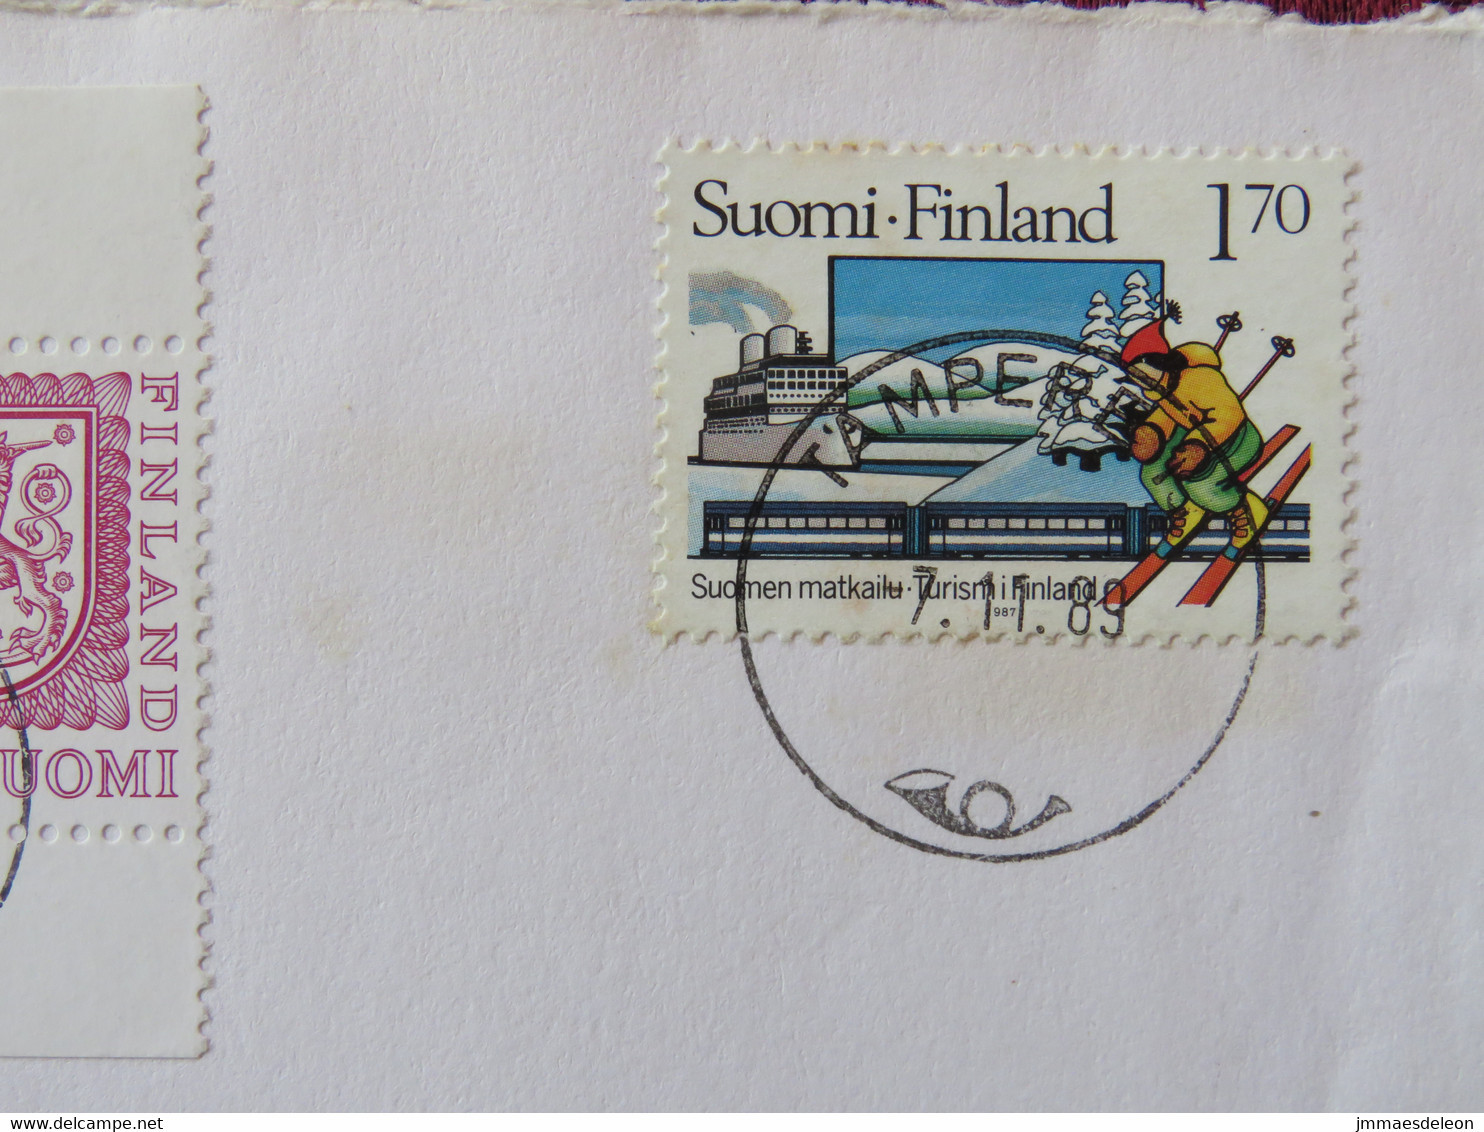 Finland 1989 FDC Cover To France - Nordic Cooperation - Lions Arms From Booklet - Ski - Ship - Covers & Documents